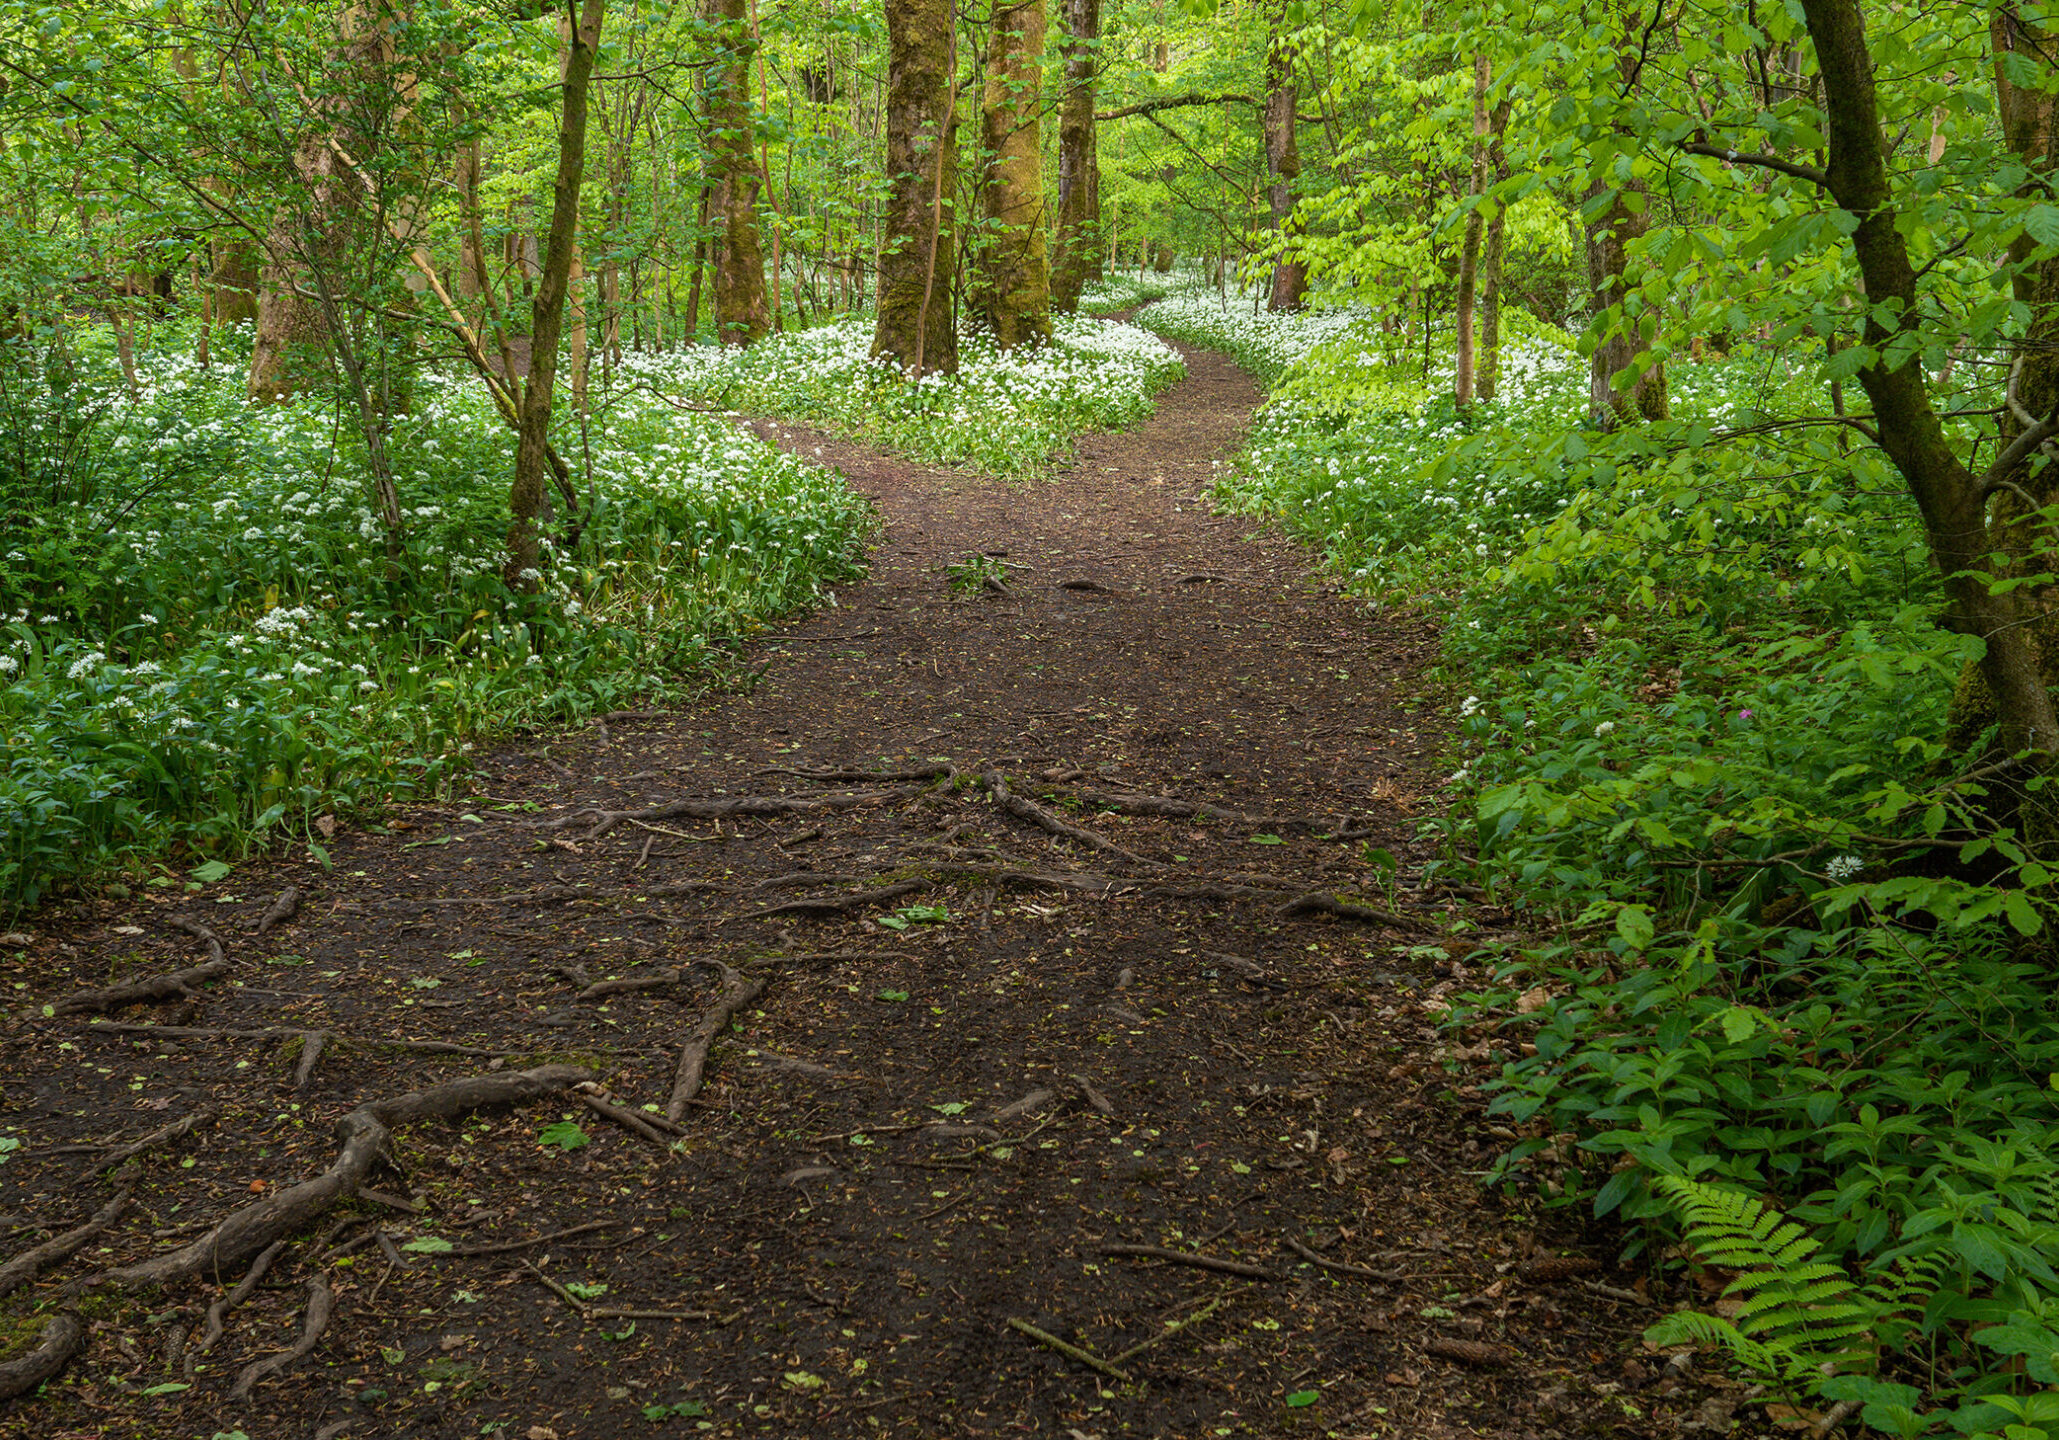 Wild garlic flowering in spring woodland in Scotland at a junction in the forest path